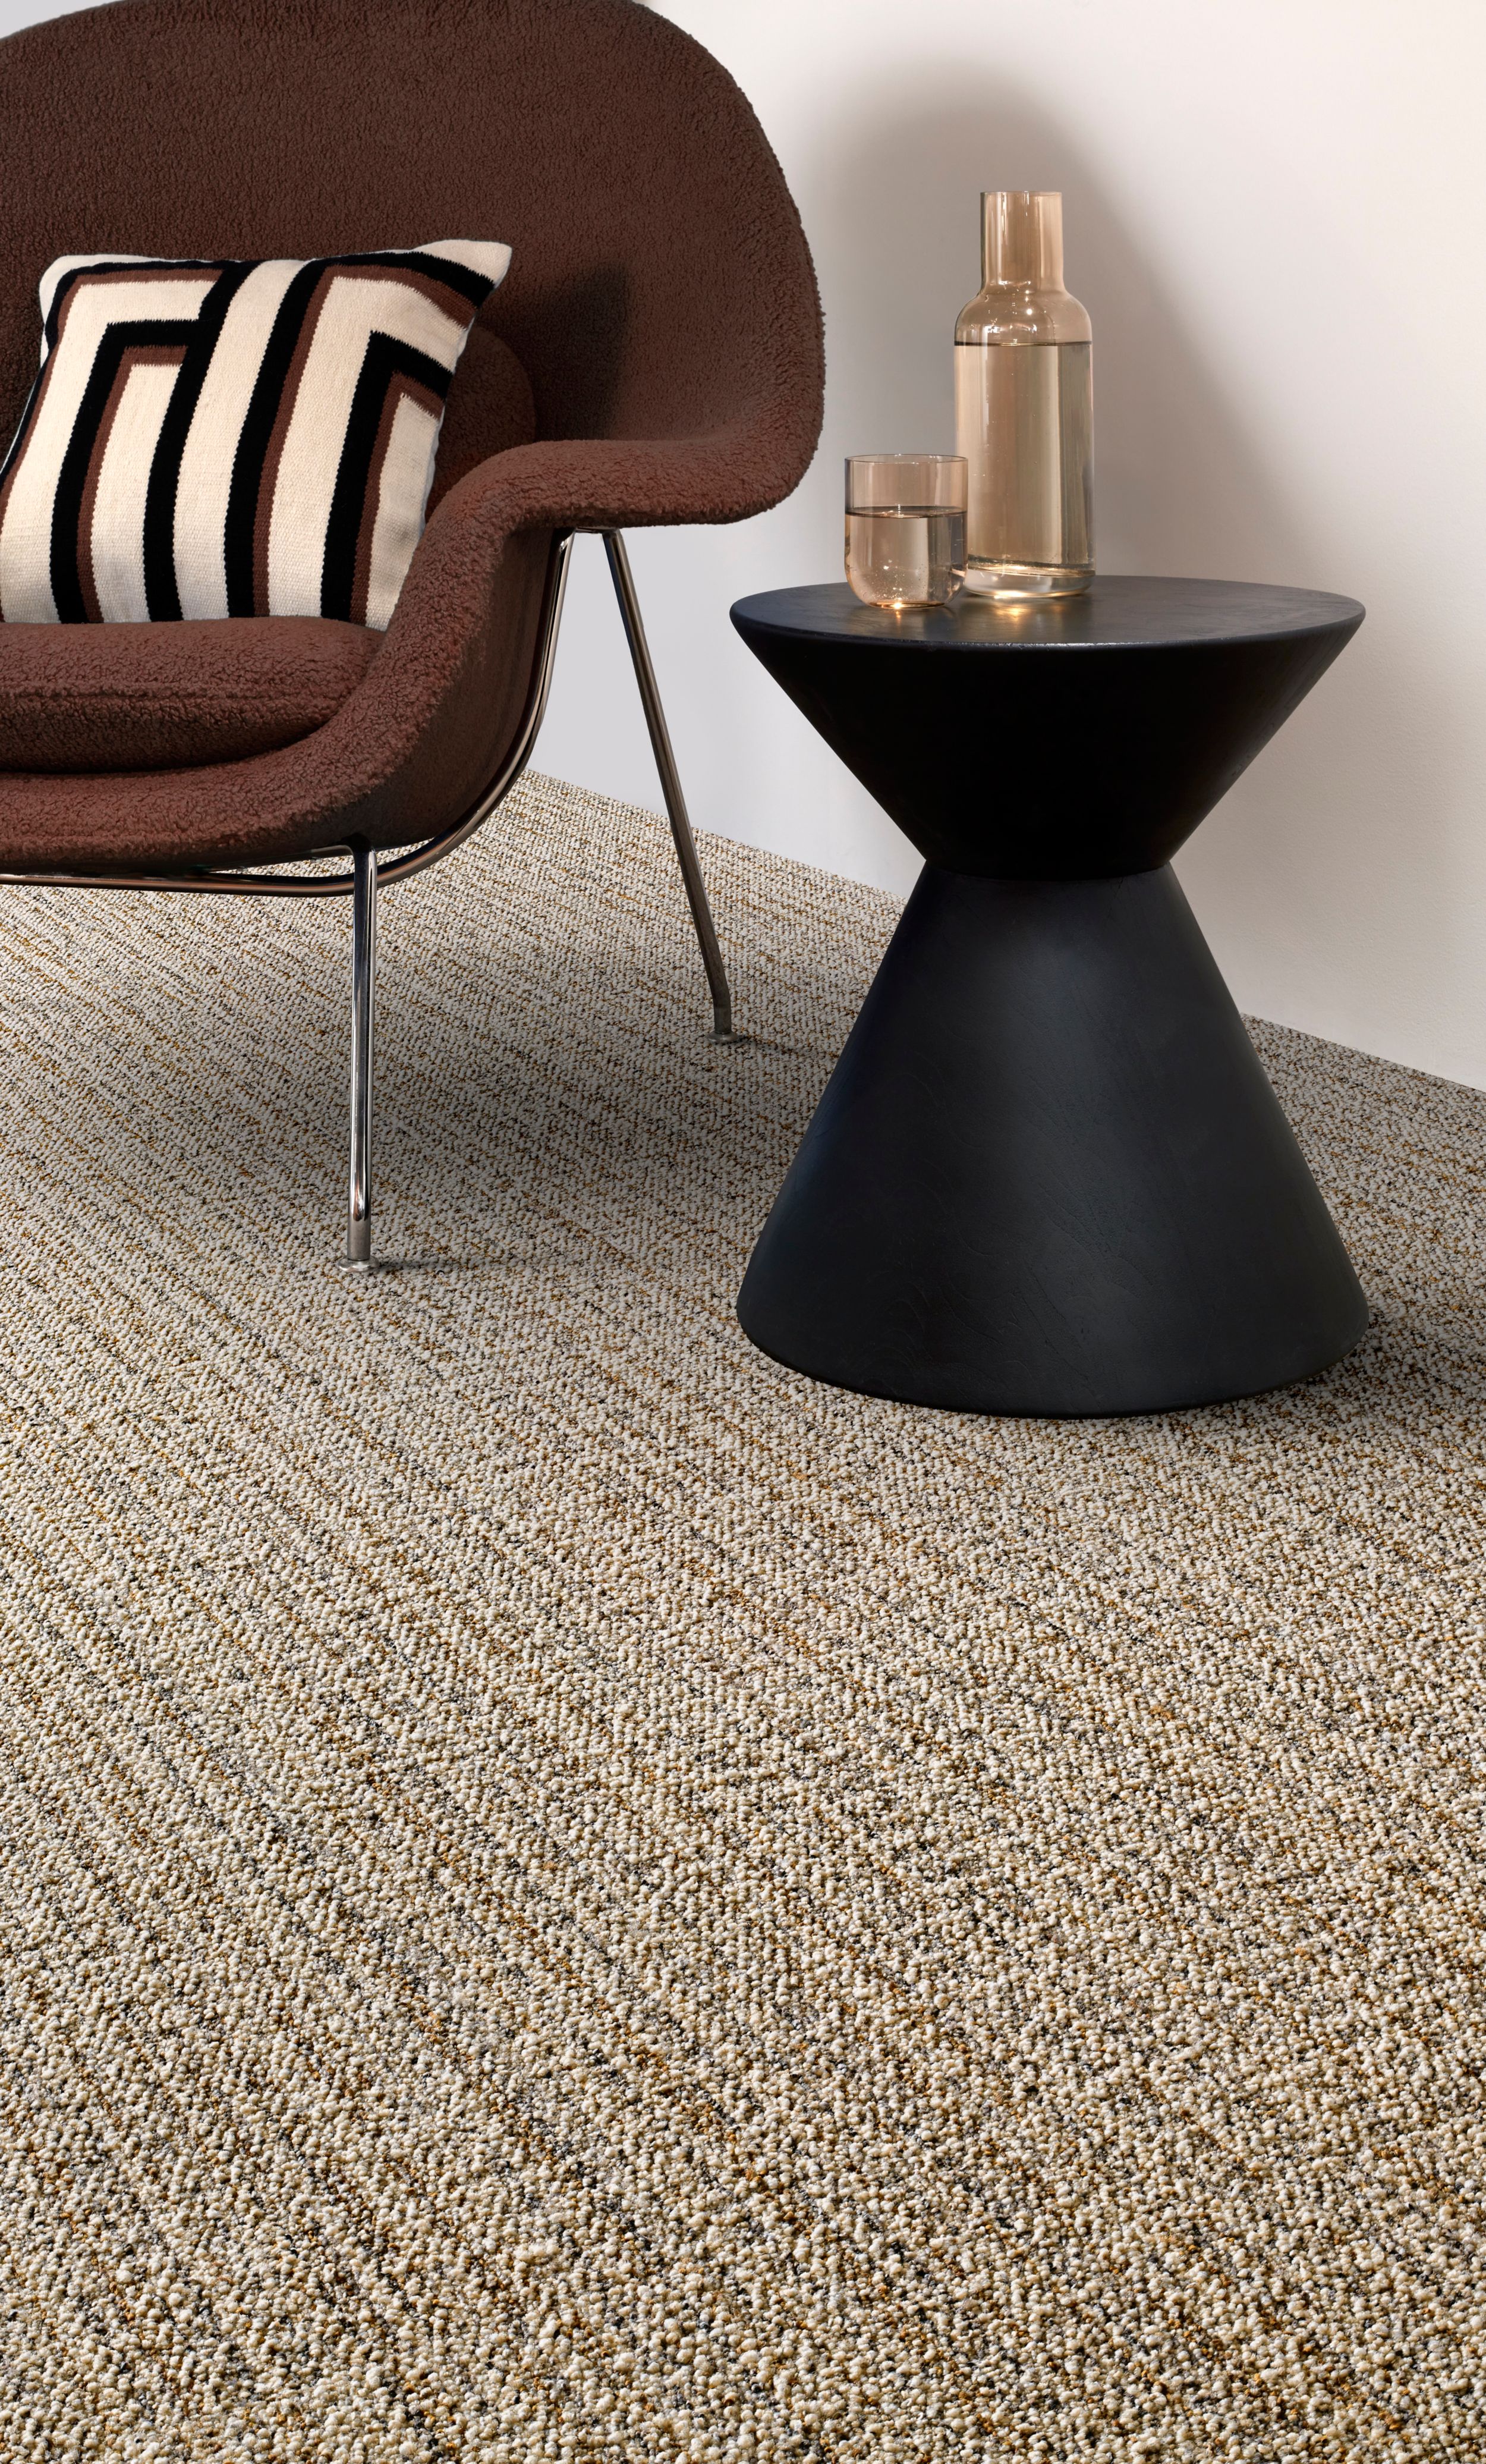 Interface E616 plank carpet tile in corporate lobby or private office afbeeldingnummer 2